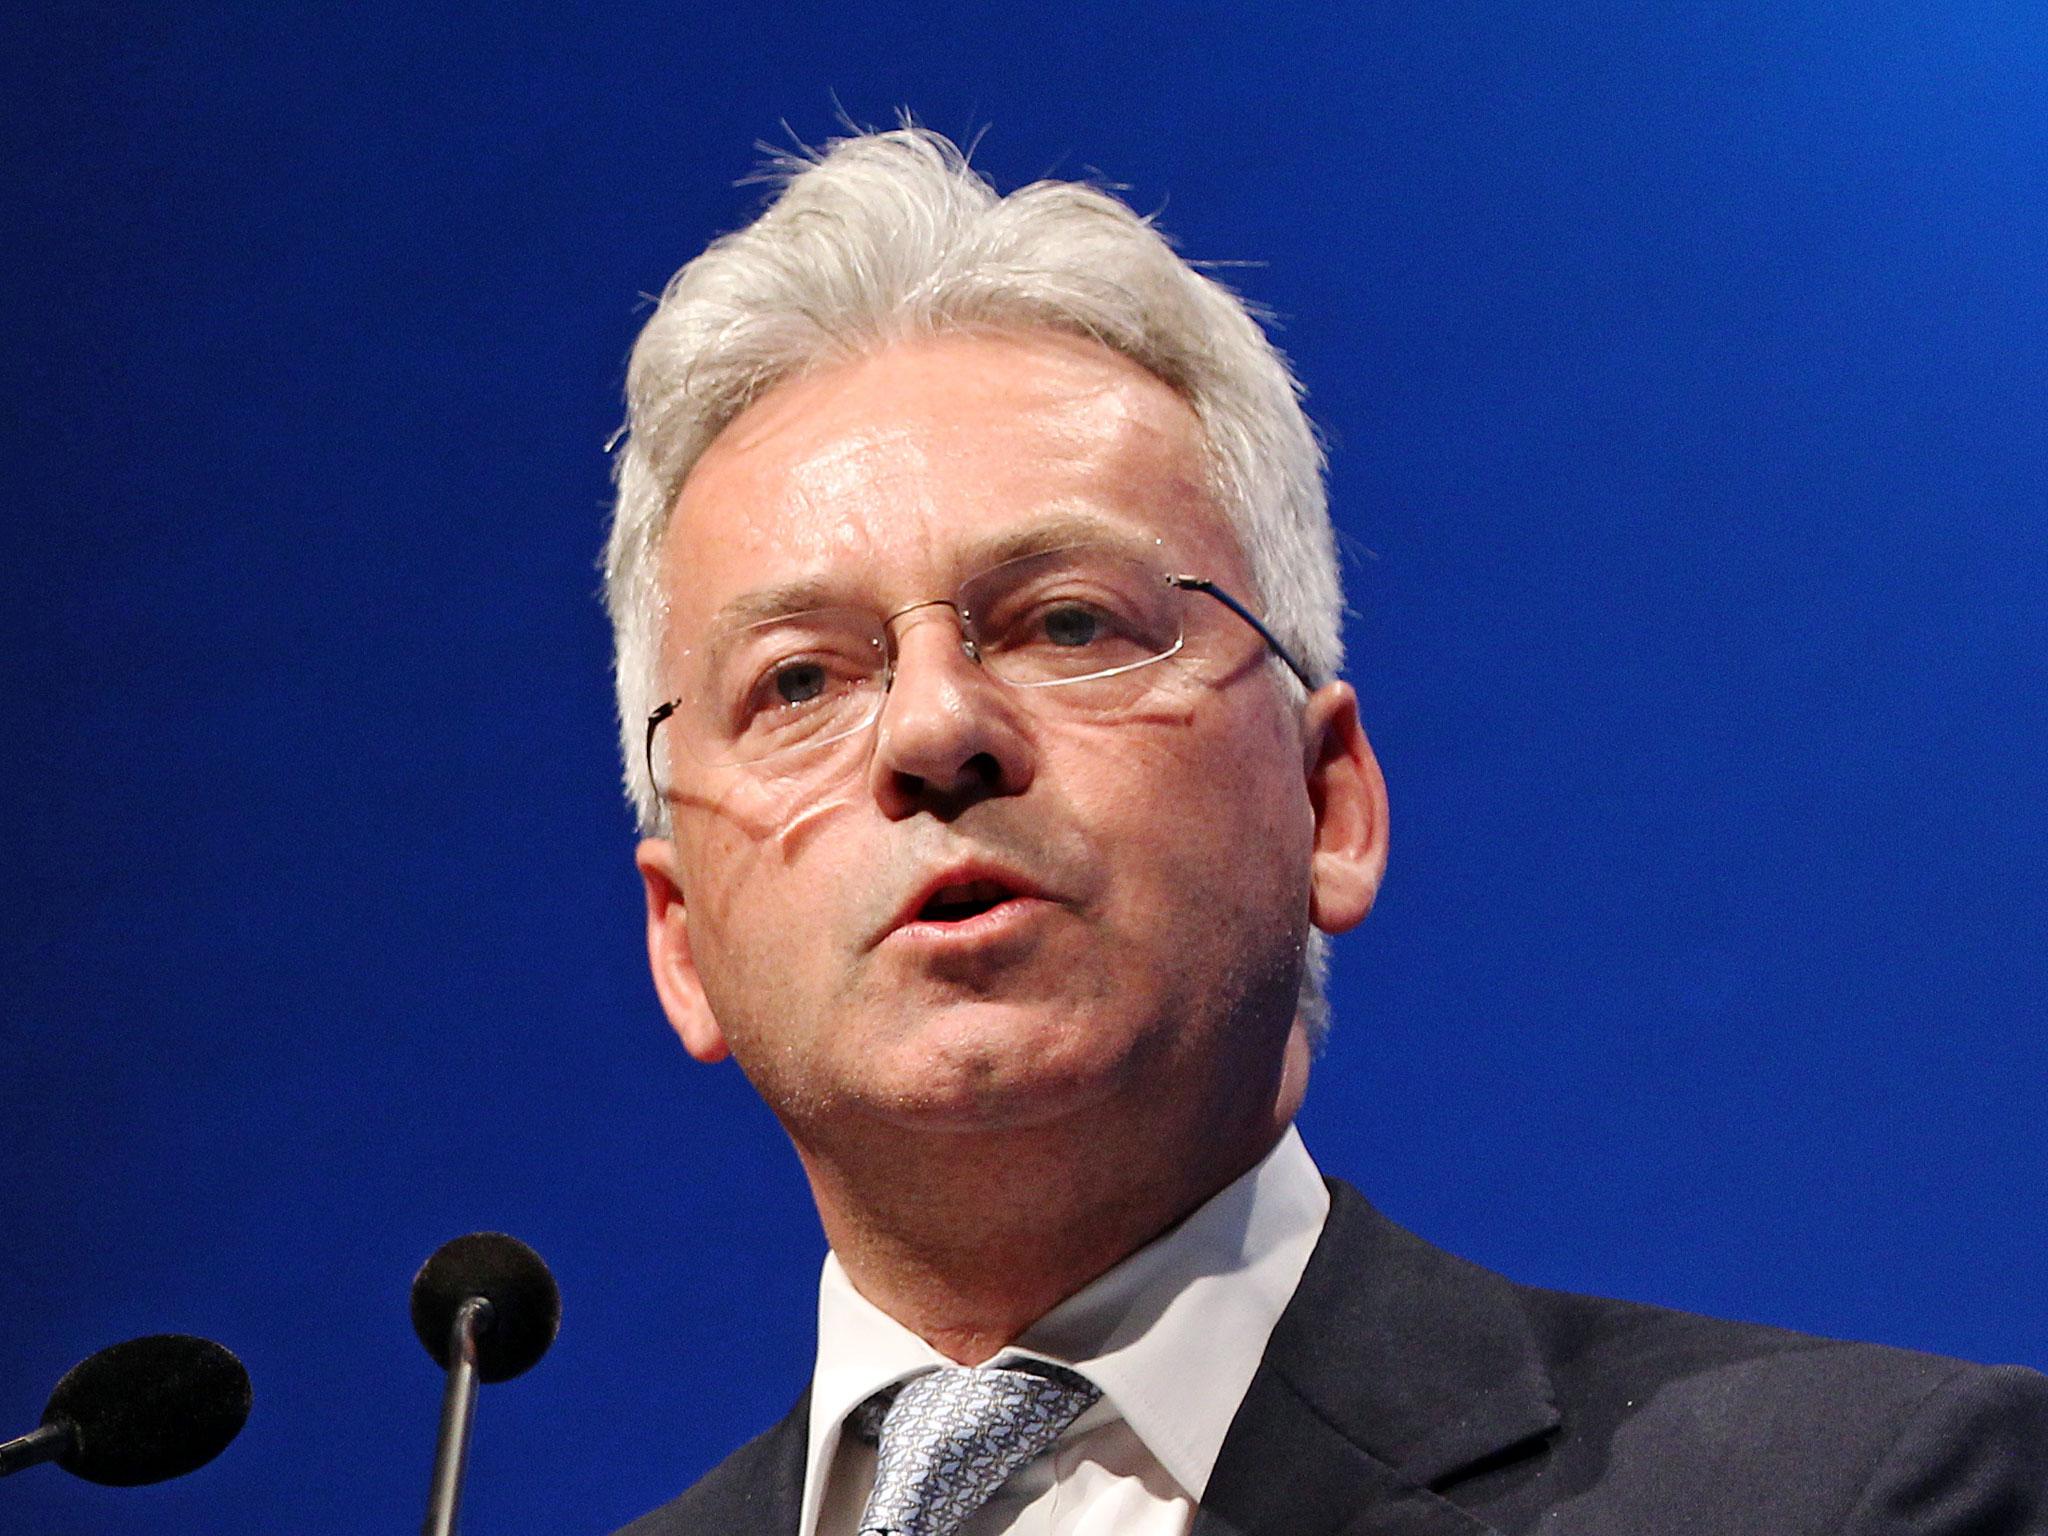 Alan Duncan made the comments at an event in Berlin